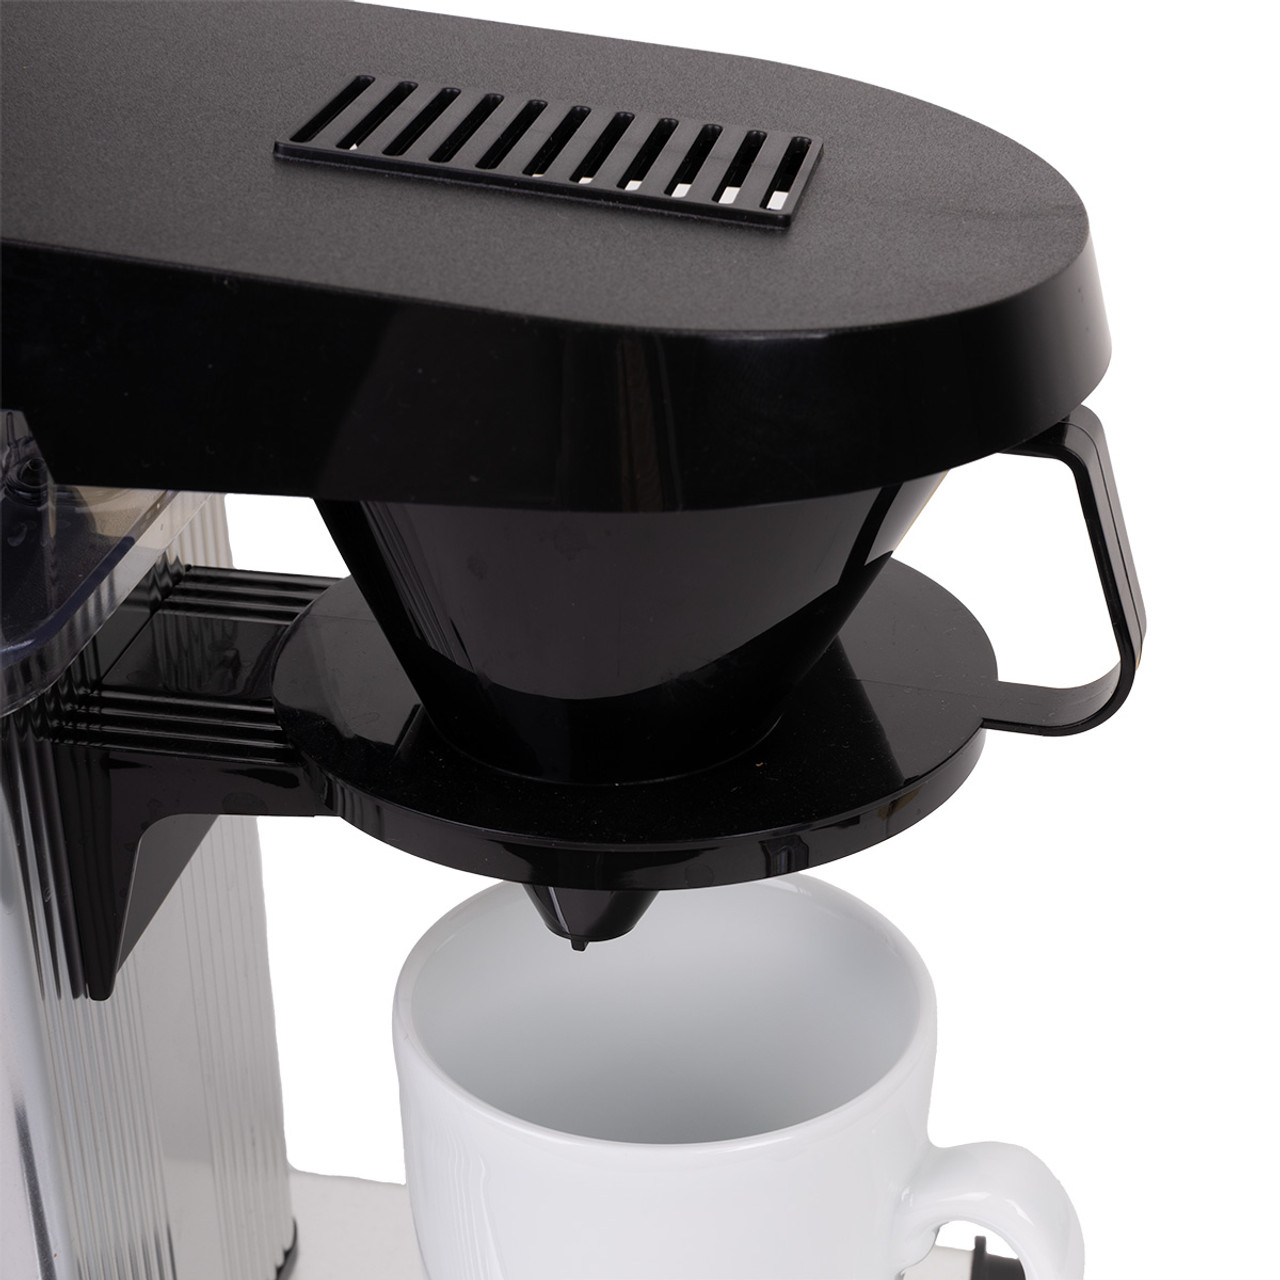 https://cdn11.bigcommerce.com/s-6h7ychjk4/images/stencil/1280x1280/products/11303/95219/Technivorm-Moccamaster-Cup-One-Automatic-Coffee-3__59449.1692361474.jpg?c=1&imbypass=on